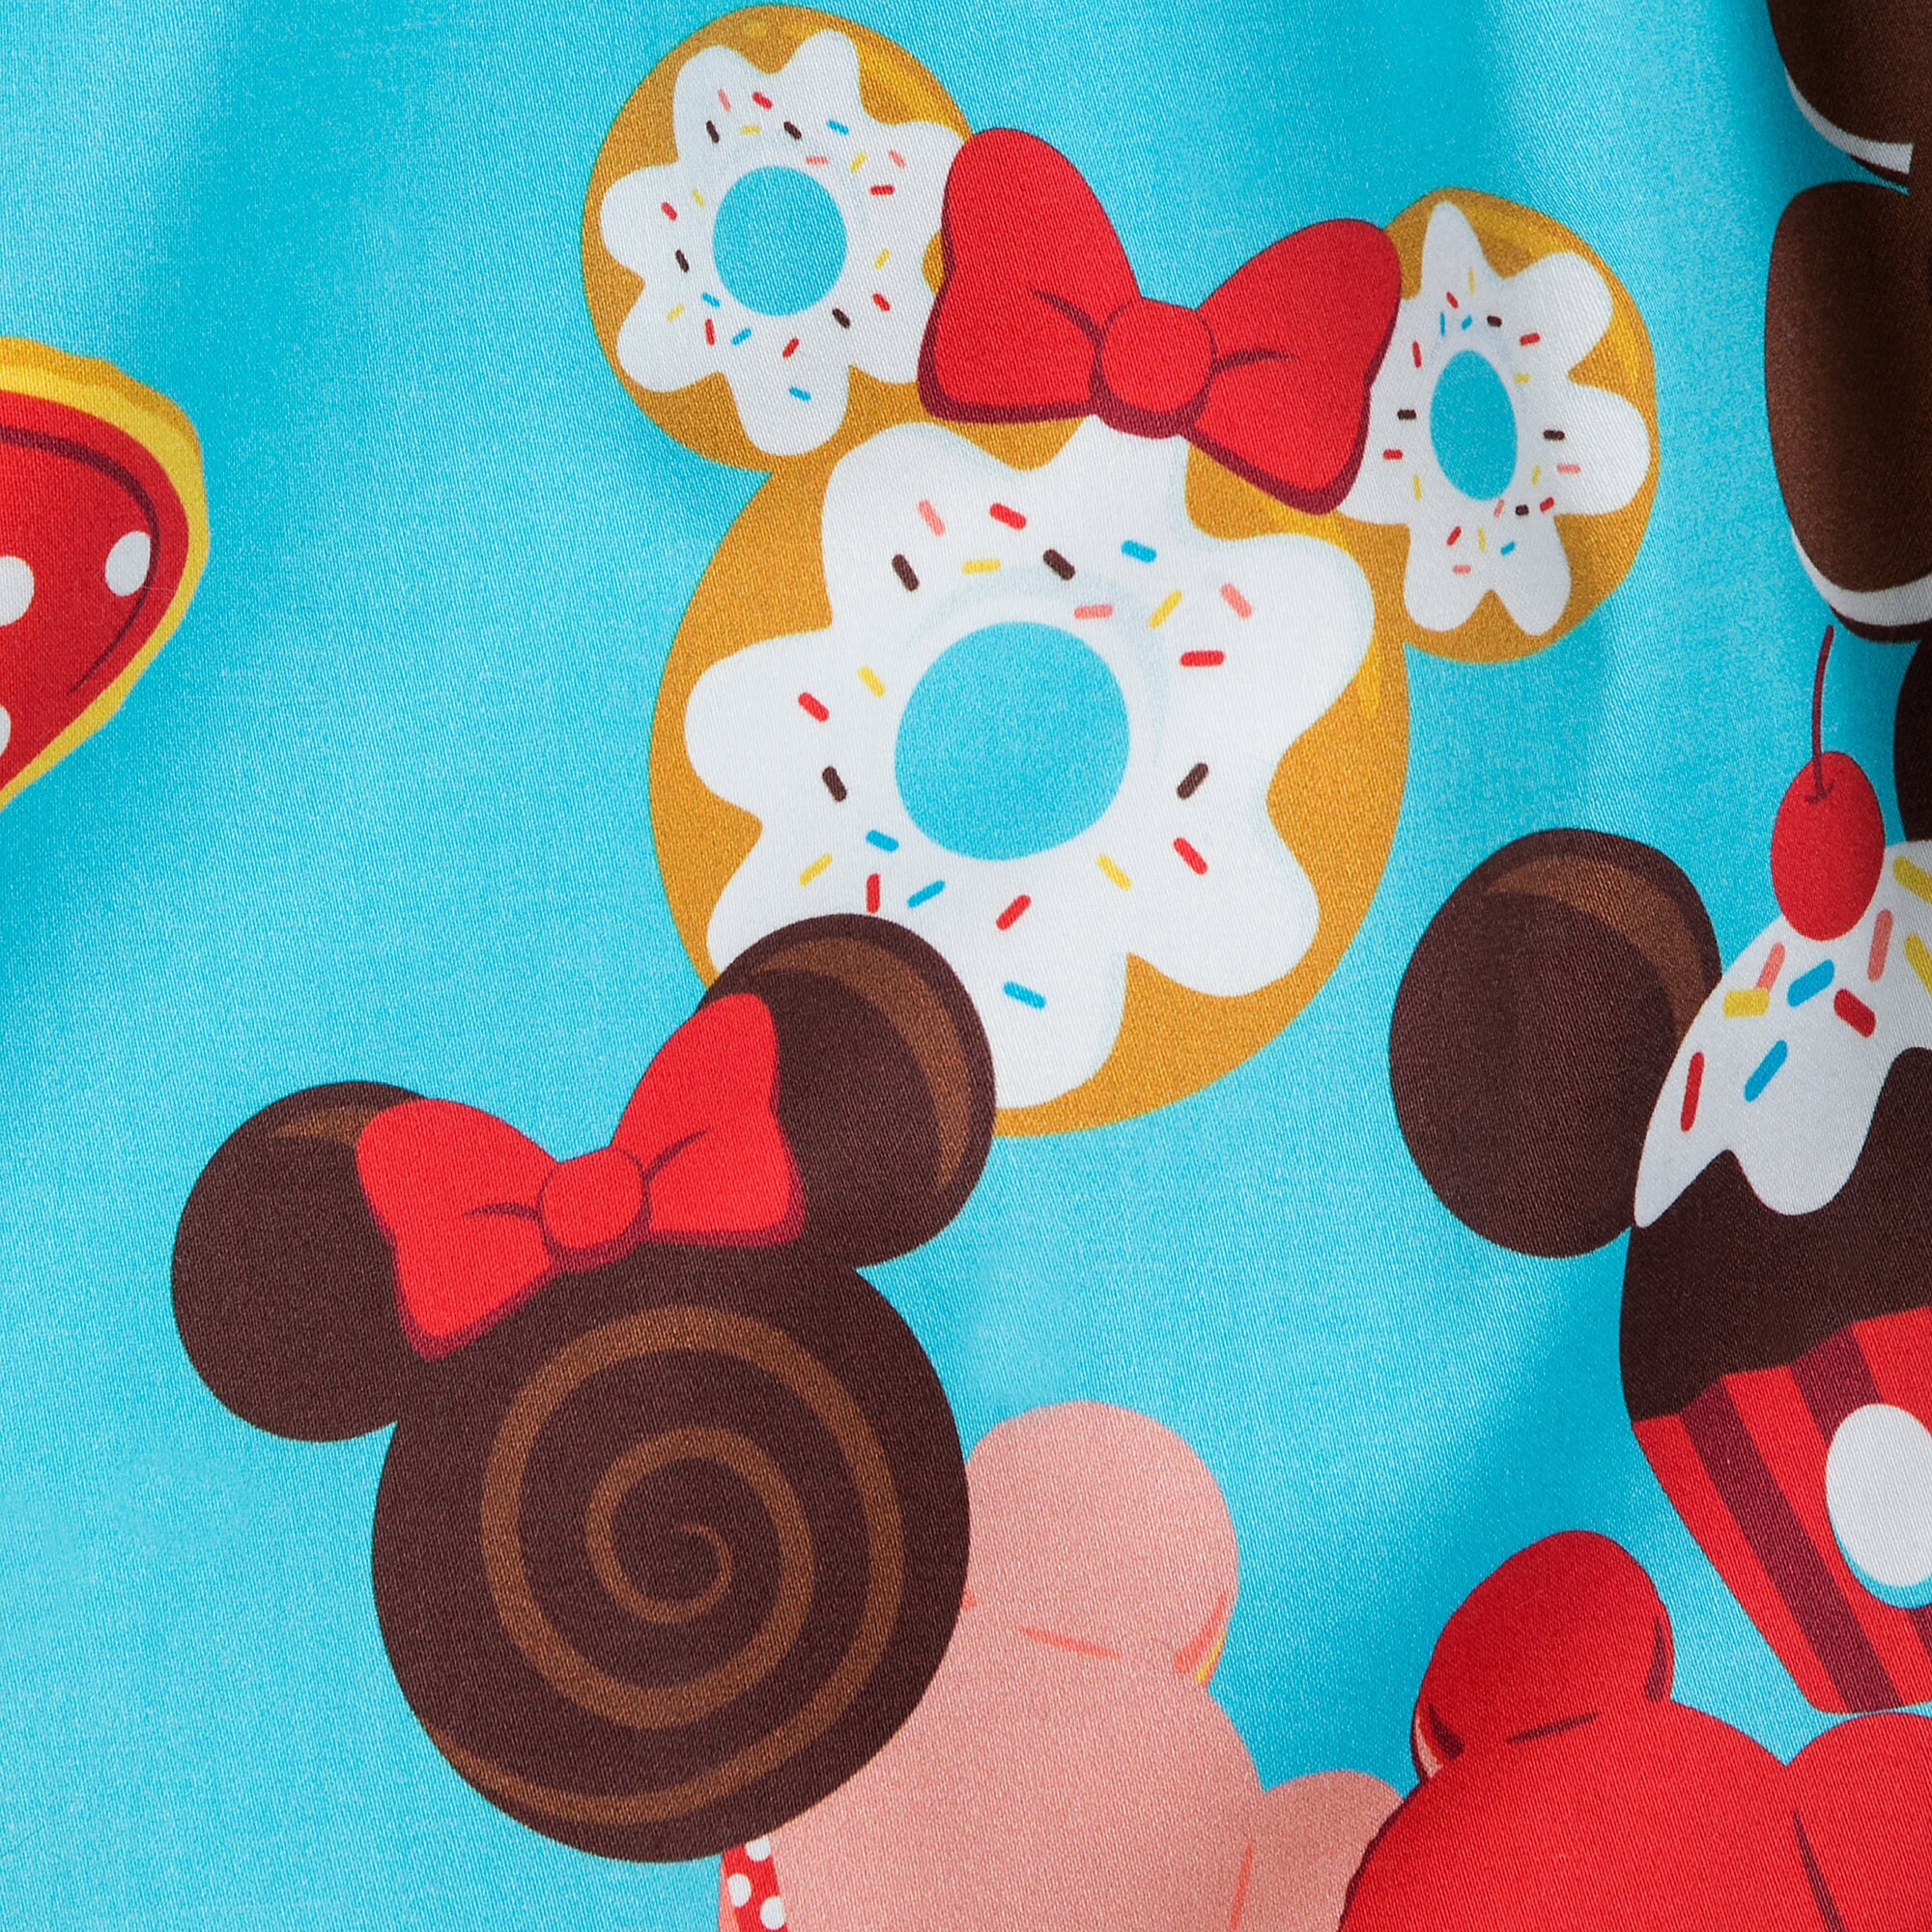 Disney Parks Food Icons Dress for Women